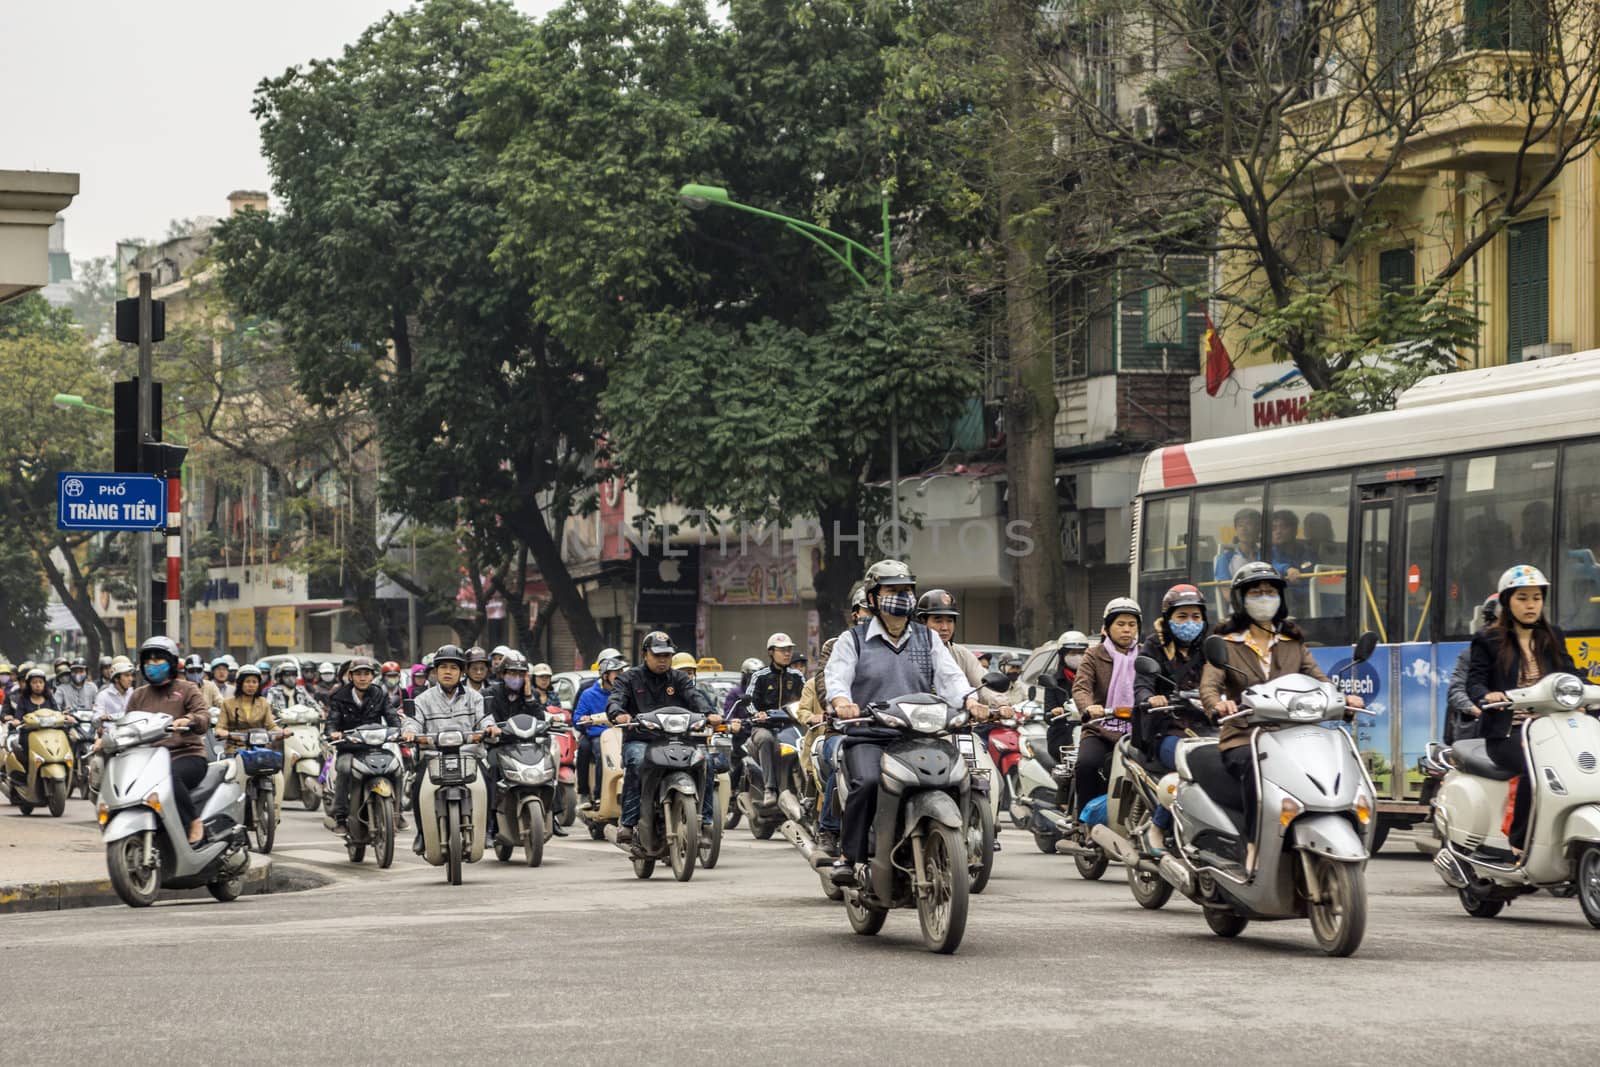 Vietnam Hanoi - March 2012: Overwhelming number of motorbikes by Claudine